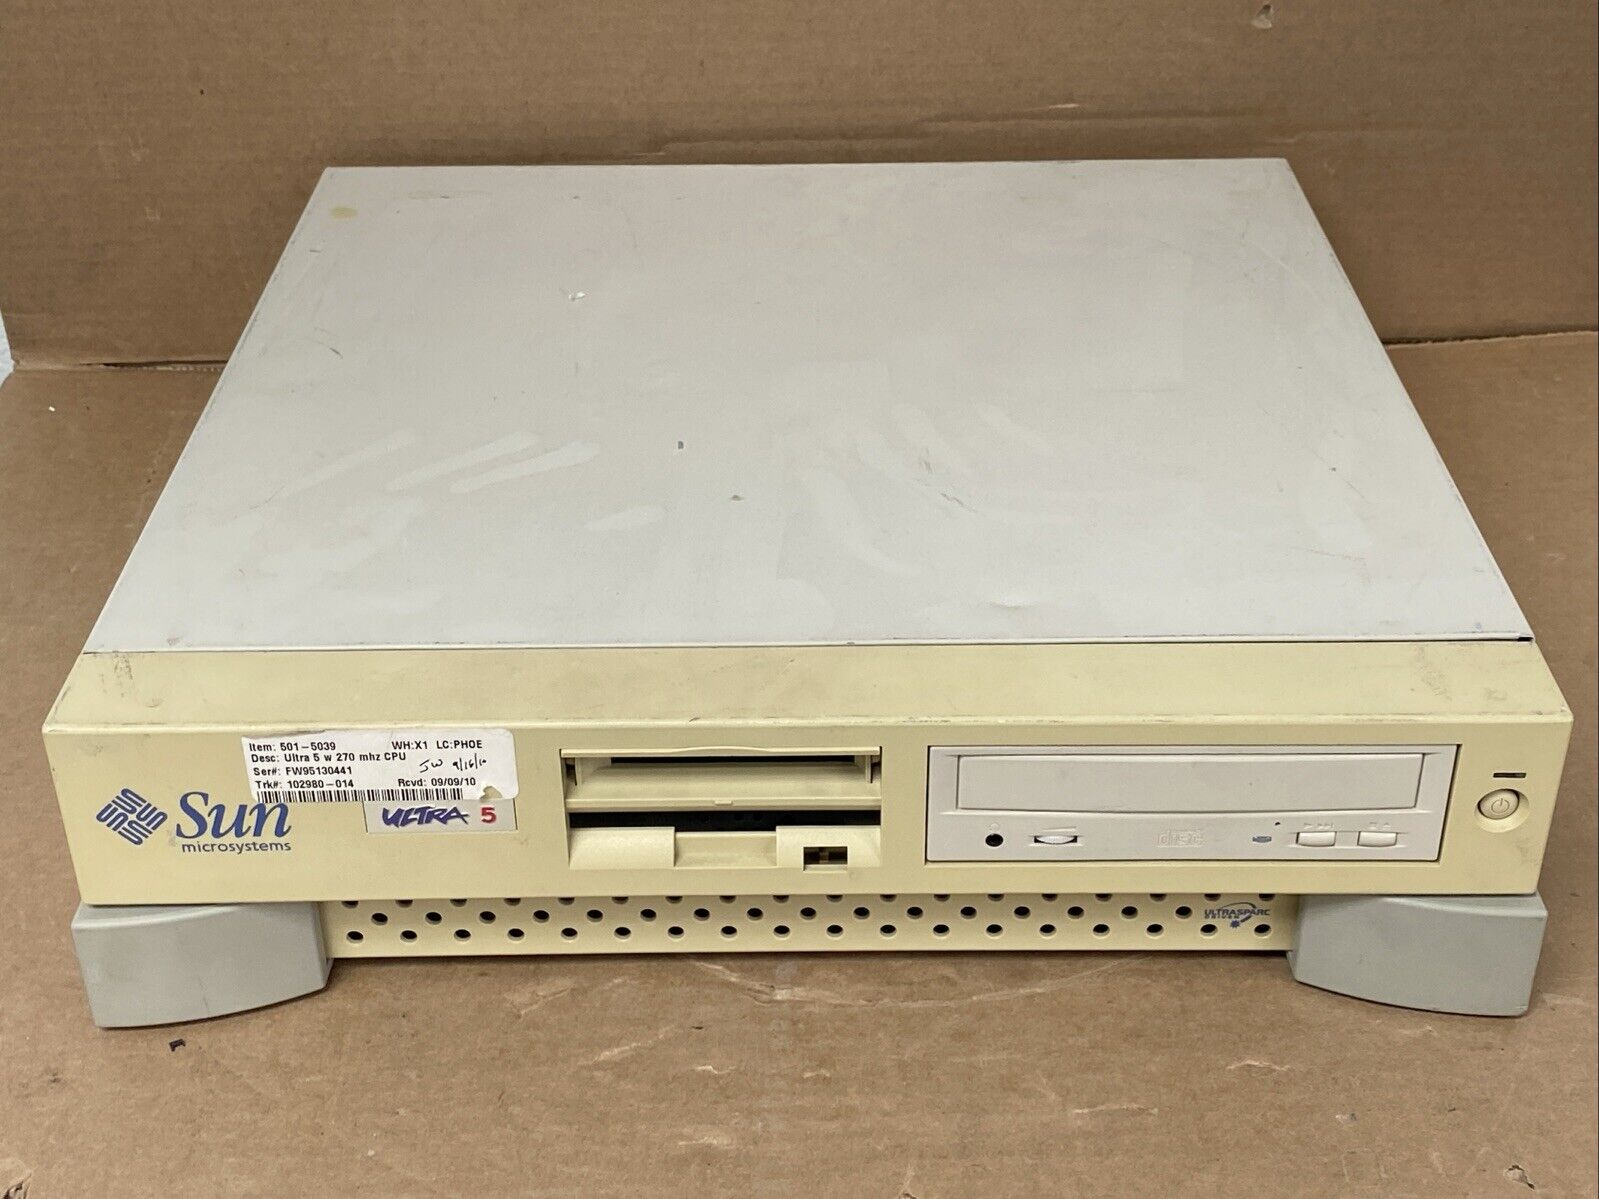 Sun Microsystems Ultra 5 - 270MHz CPU - Boots Up - Vintage Workstation 